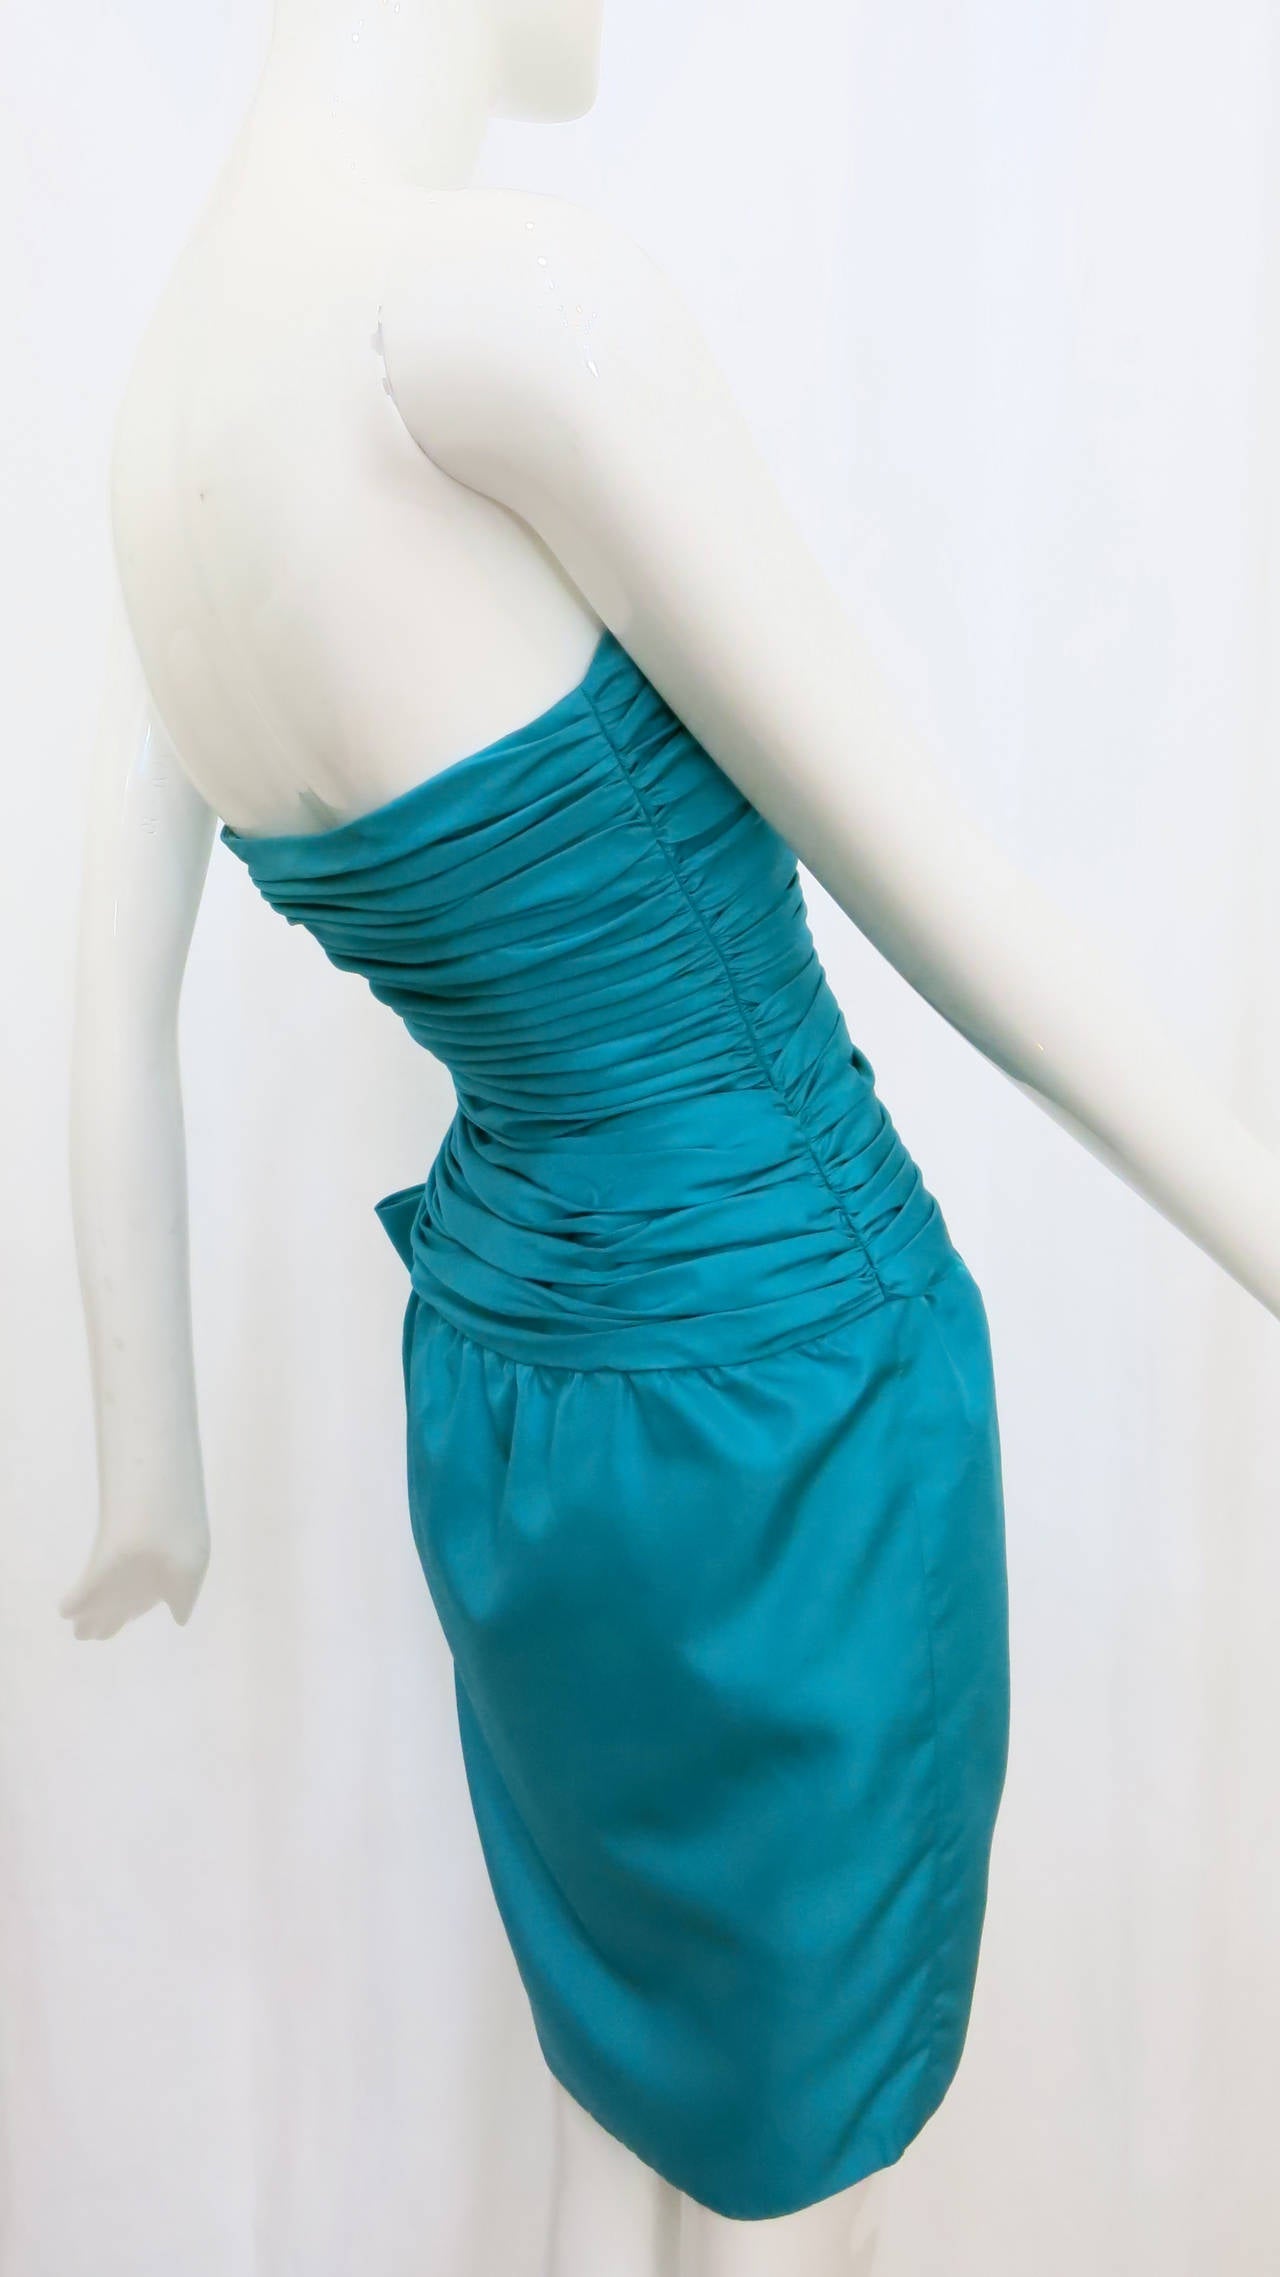 This elegant 1980s silk strapless cocktail dress from the Christian Dior 